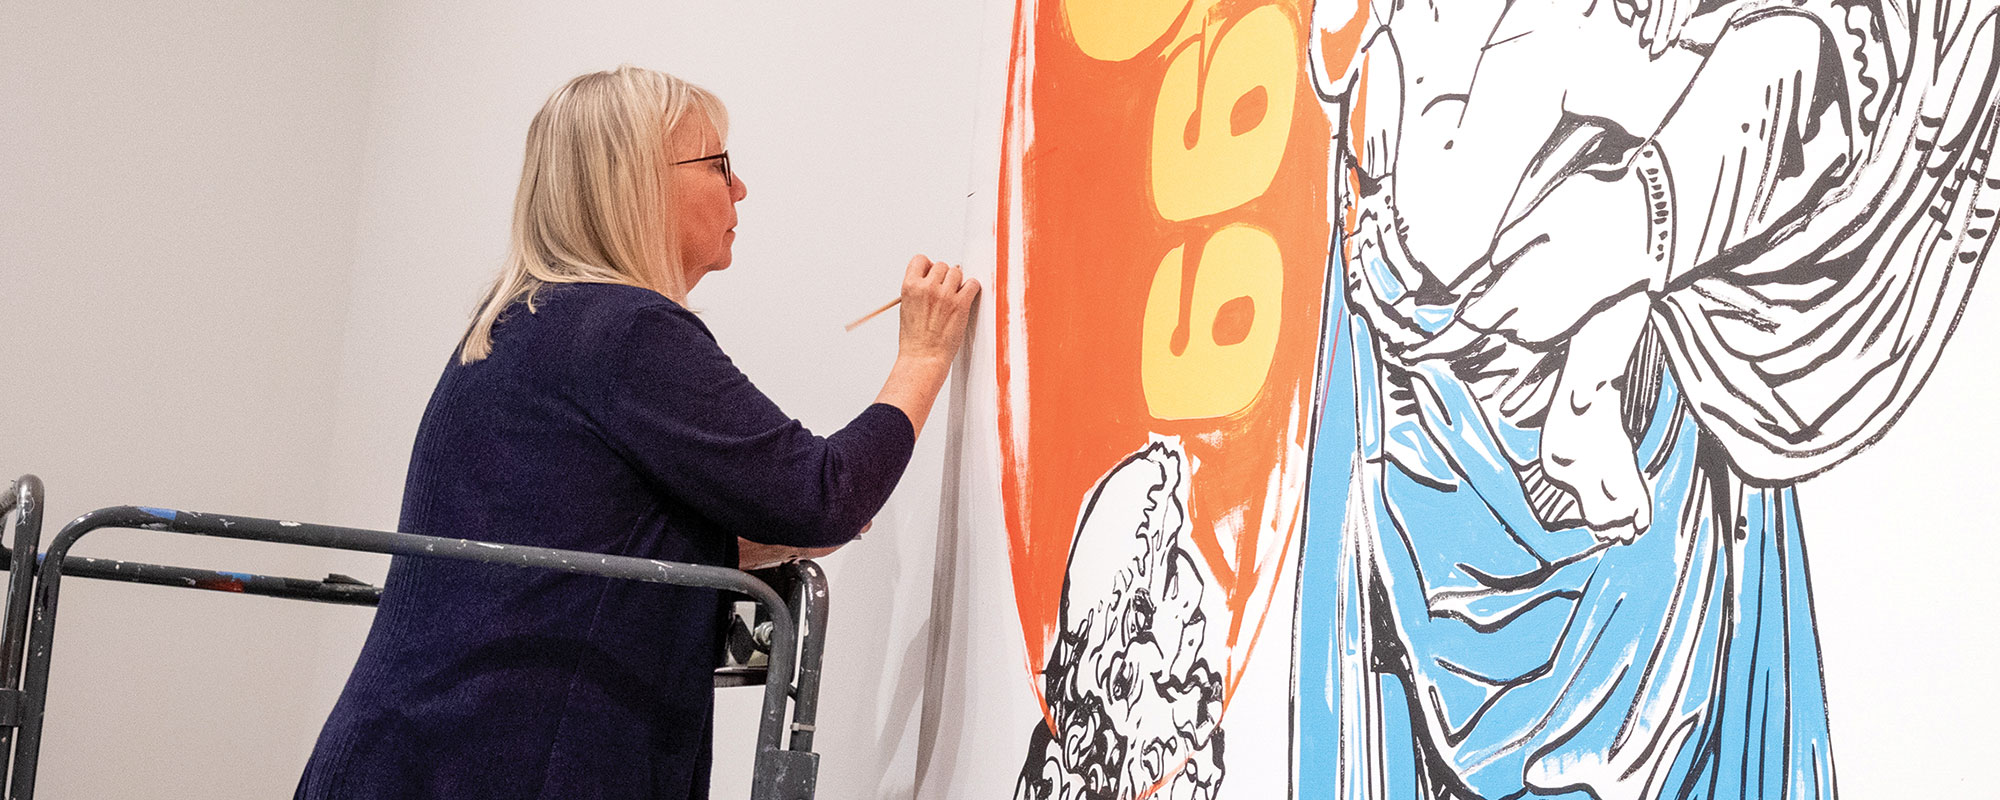 Conservator working on a piece of Warhol's artwork